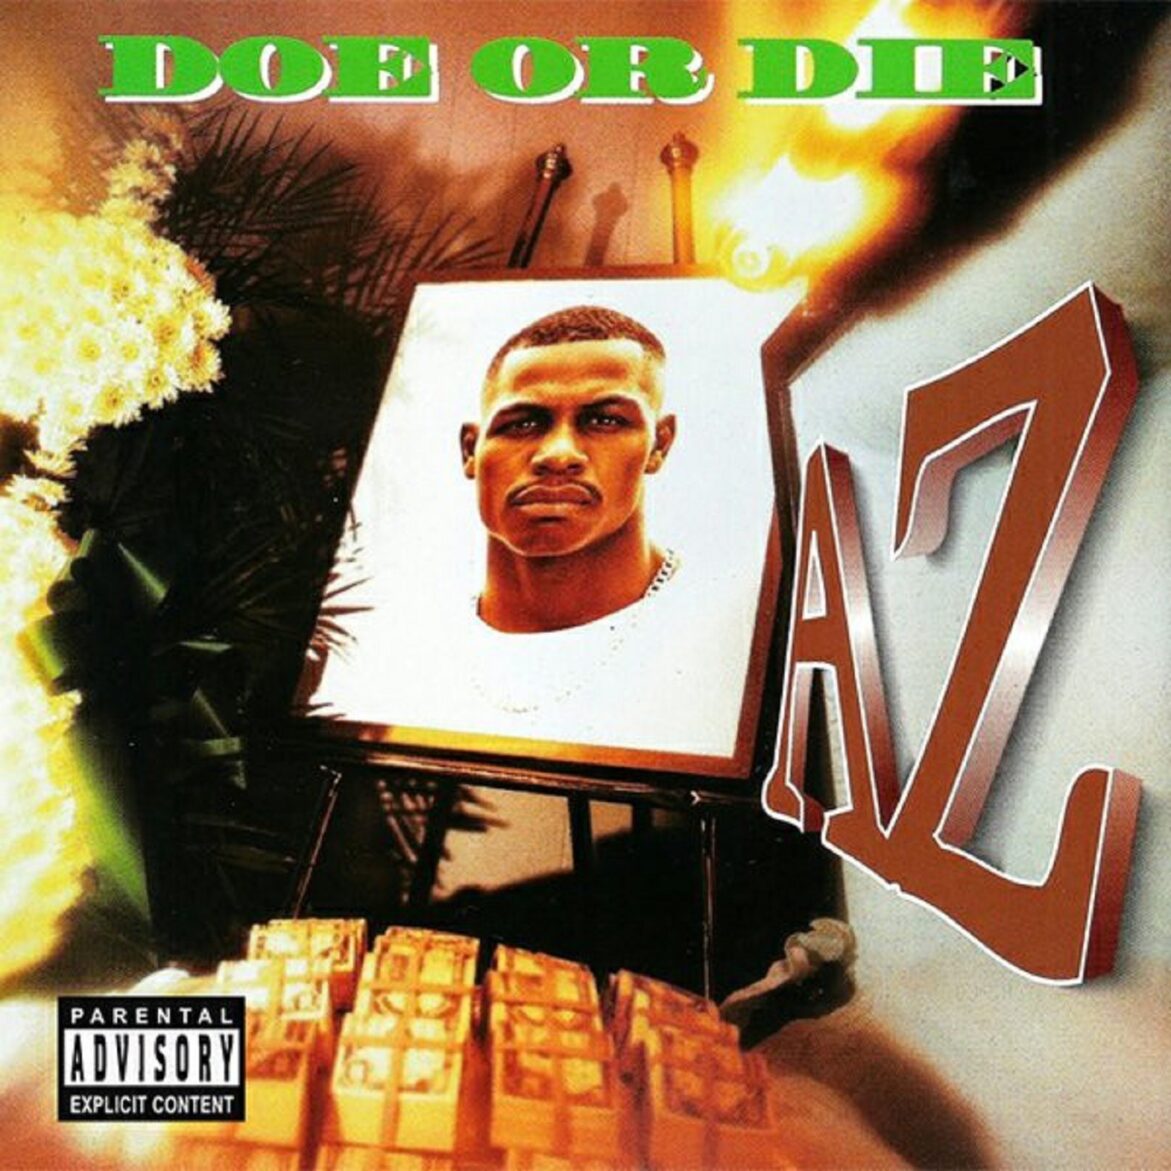 Black Podcasting - AZ: Doe or Die (1995). How "Visualizing The Realism Of Life" Became Reality